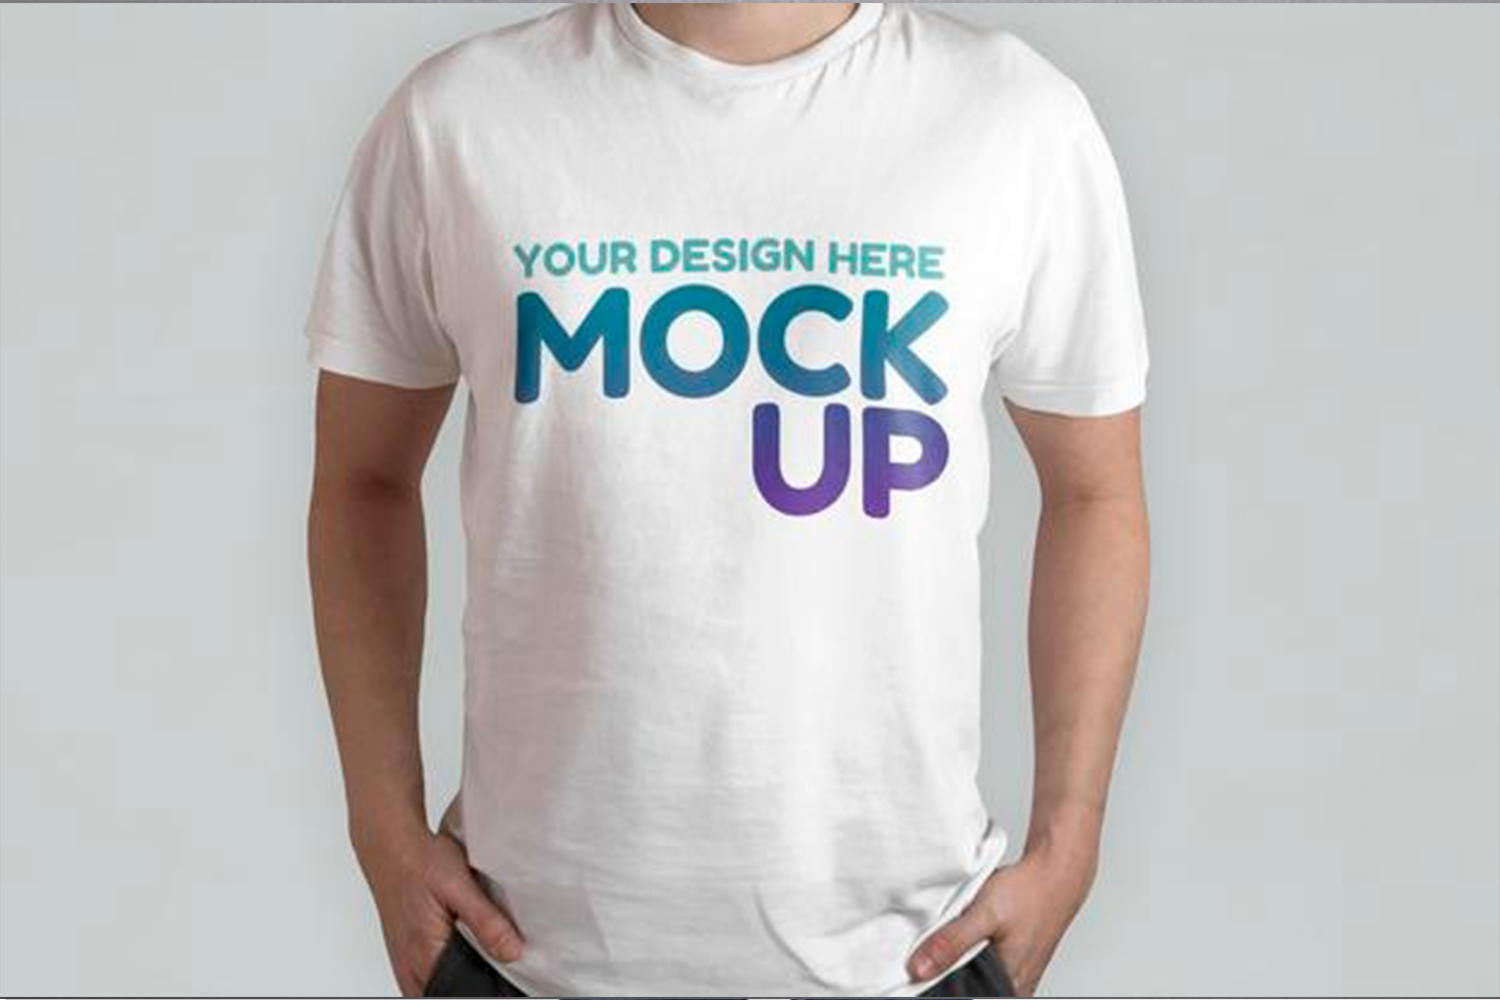 White t-shirt model front view mockup Free Download 